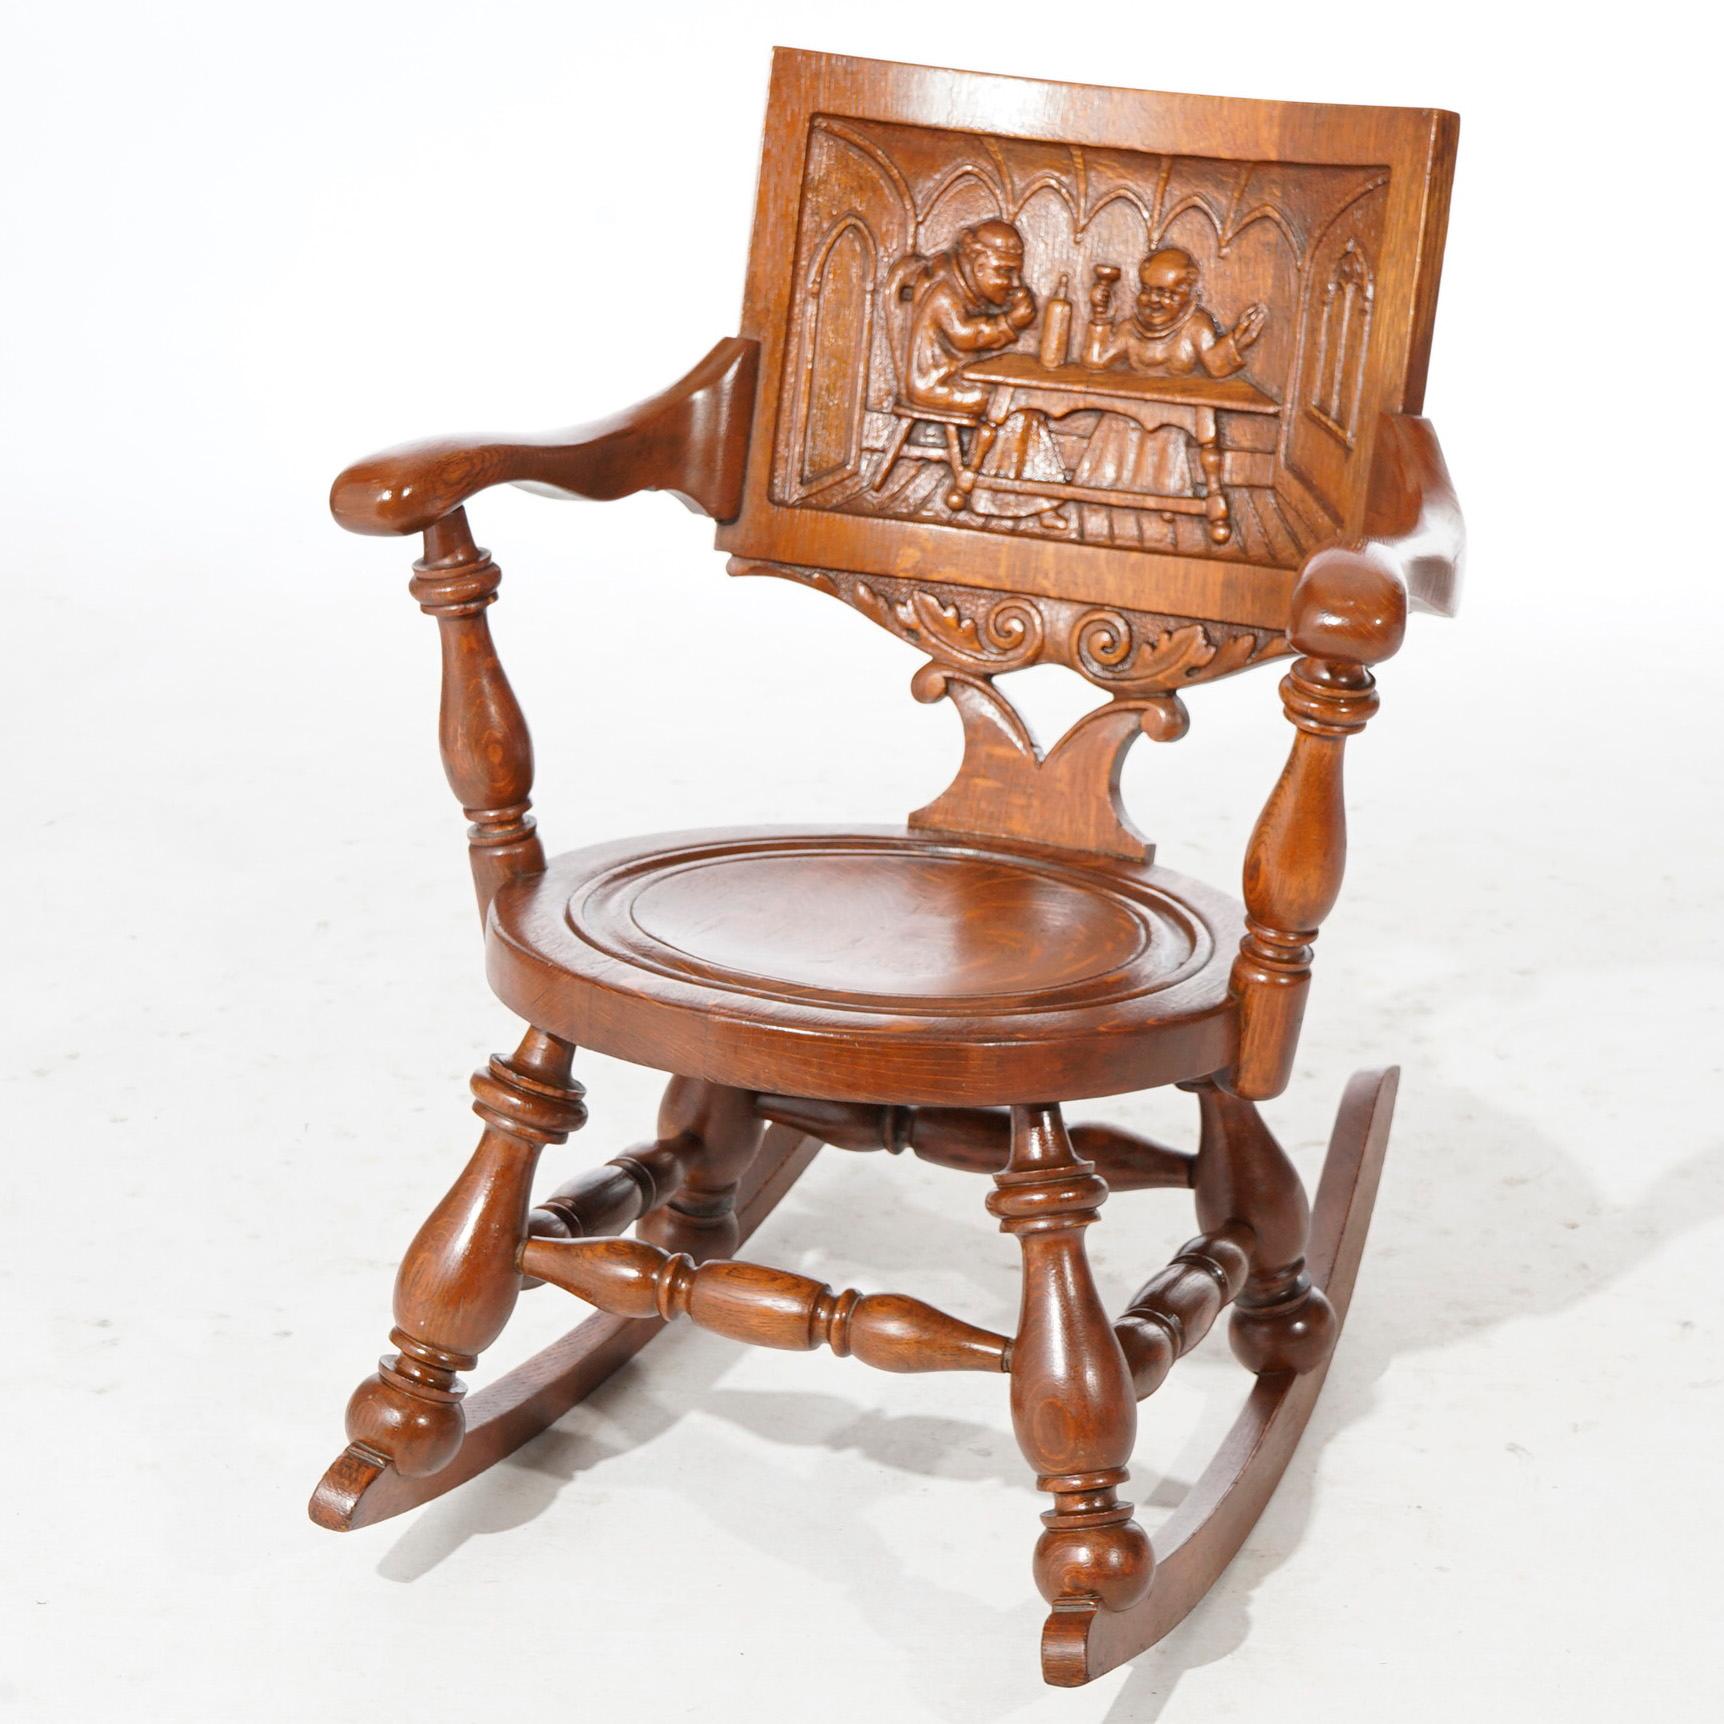 An antique English rocking chair offers oak construction with carved genre pub scene in back, turned balustrade supports and carved foliate elements, c1910

Measures- 32.25'' H x 25.25'' W x 30.5'' D; 15.5'' seat height.

*Ask about DISCOUNTED